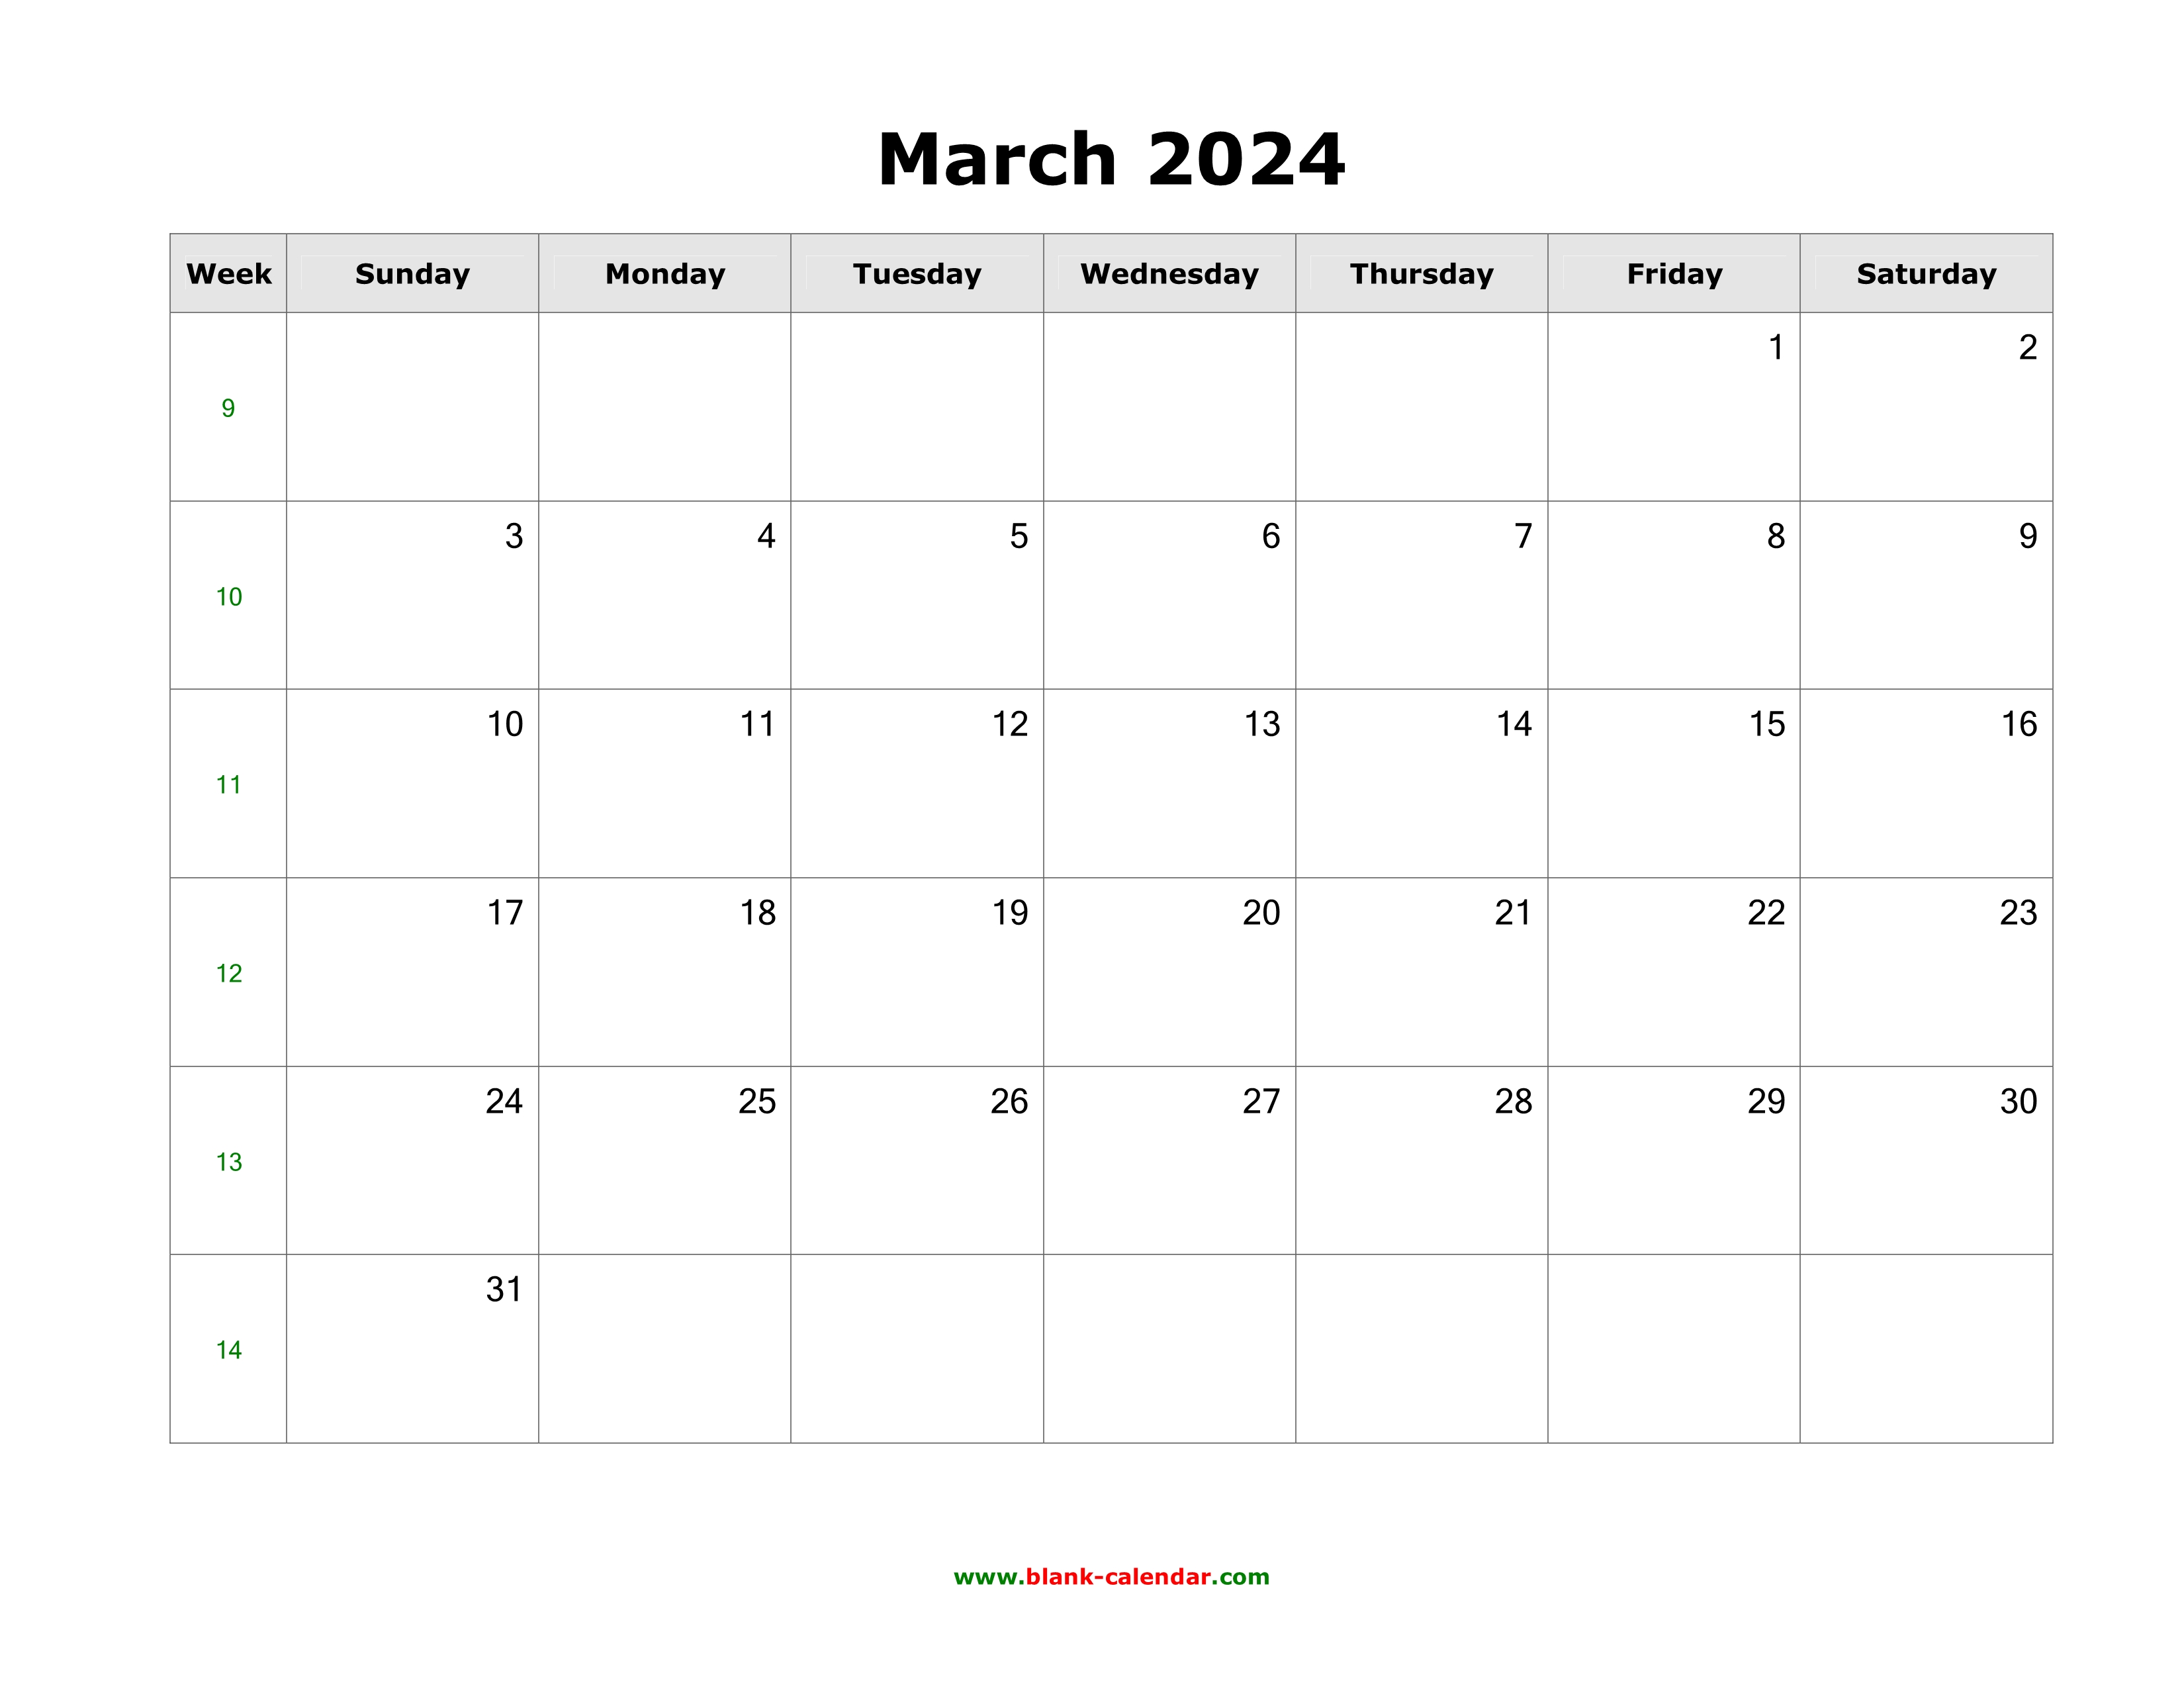 Download March 2024 Blank Calendar with US Holidays (horizontal)